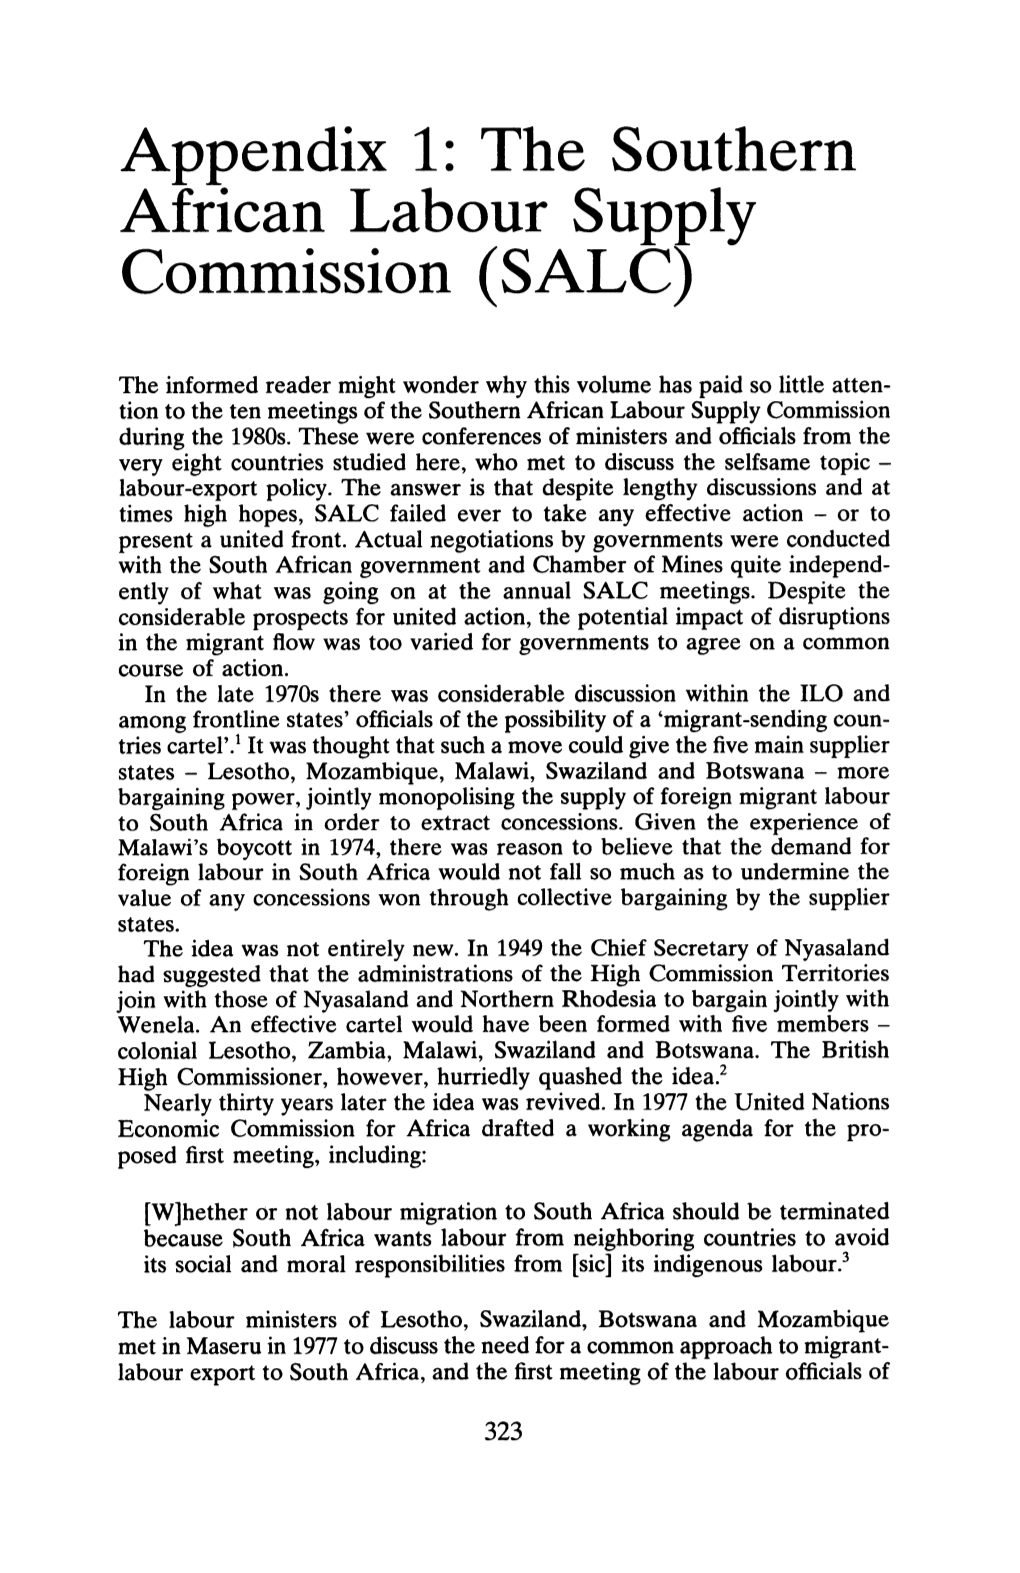 Appendix 1: the Southern African Labour Supply Commission (SALC)